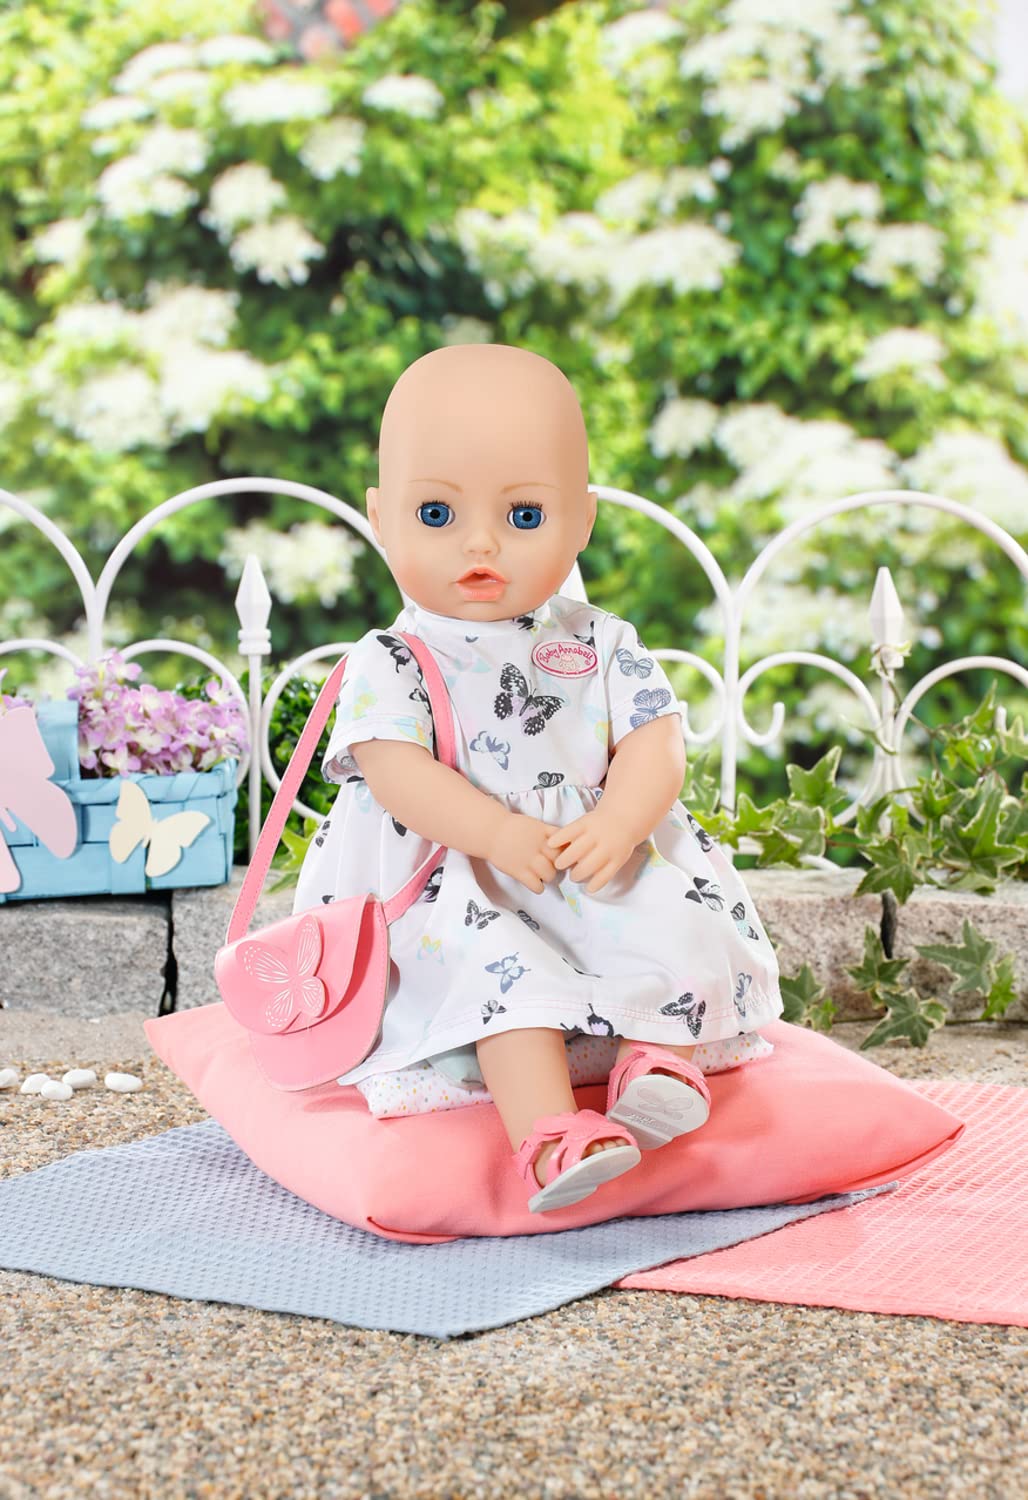 Baby Annabell Deluxe Butterfly Dress - to Fit 43cm Baby Annabell Dolls - Deluxe Set Includes Beautiful Dress, Bag, Sandals and Clothes Hanger - Suitable for Children Aged 3+ Years - 706701